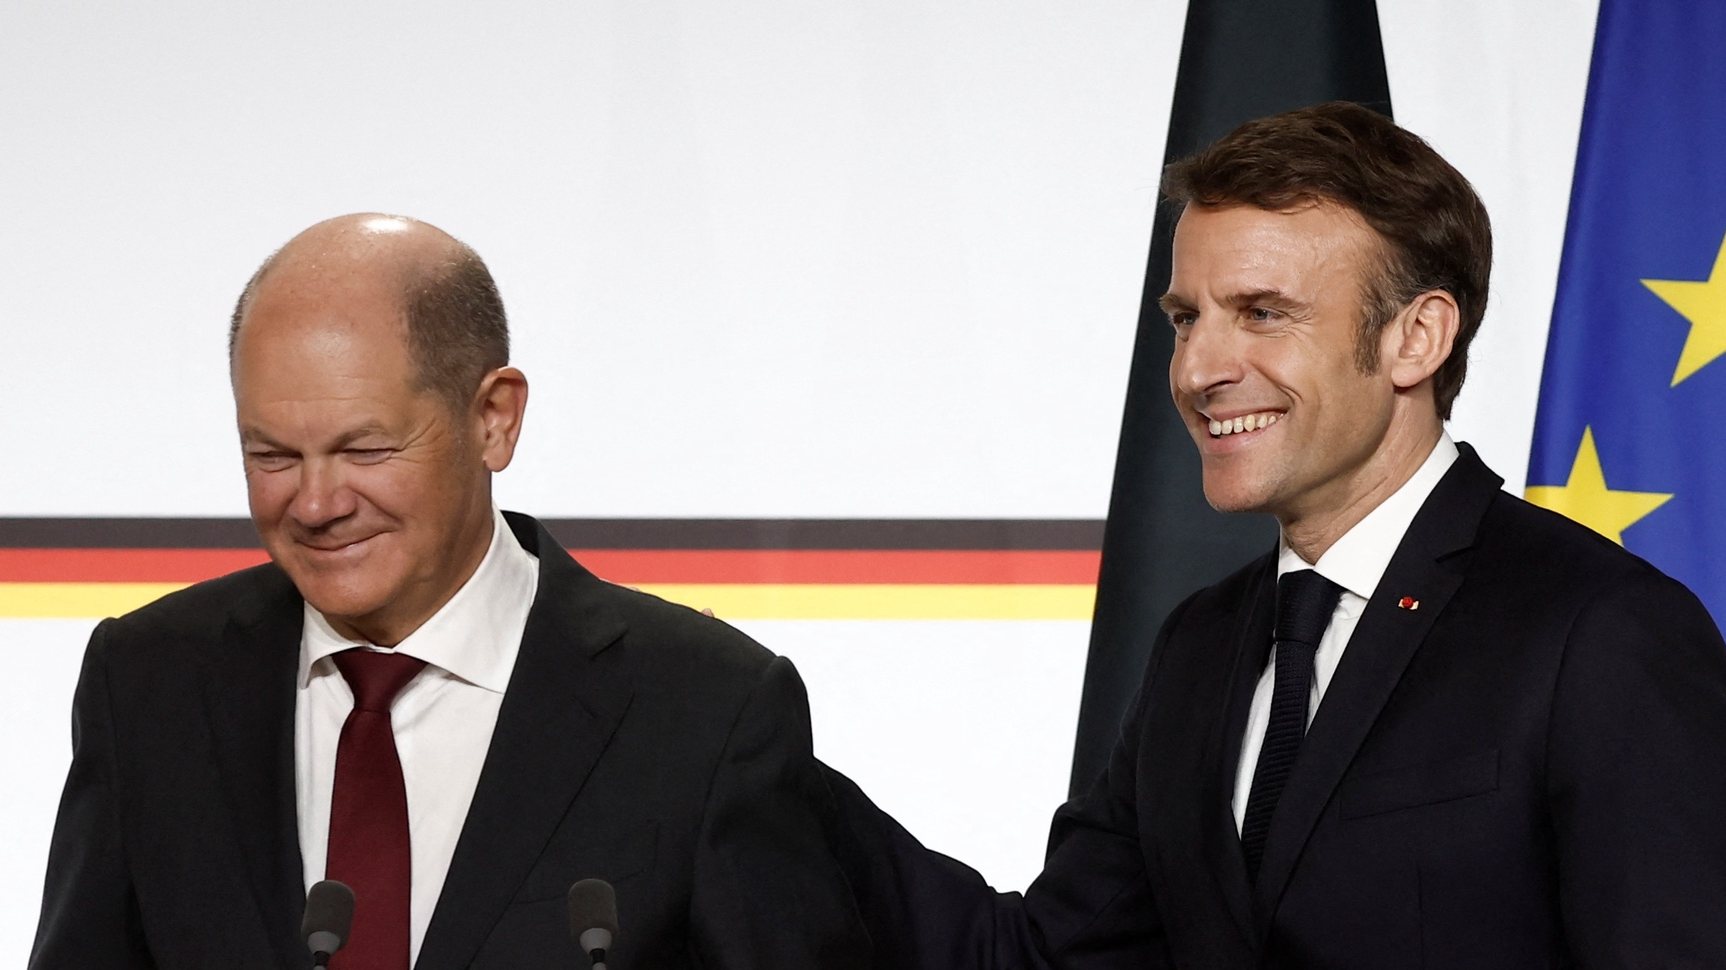 epa10423520 French President Emmanuel Macron (R) and German Chancellor Olaf Scholz attend a joint news conference as part of a Franco-German joint cabinet meeting, during the celebration of the 60th anniversary of the signing of the Elysee Treaty, at the Elysee Palace in Paris, France, 22 January 2023.  EPA/BENOIT TESSIER / POOL  MAXPPP OUT